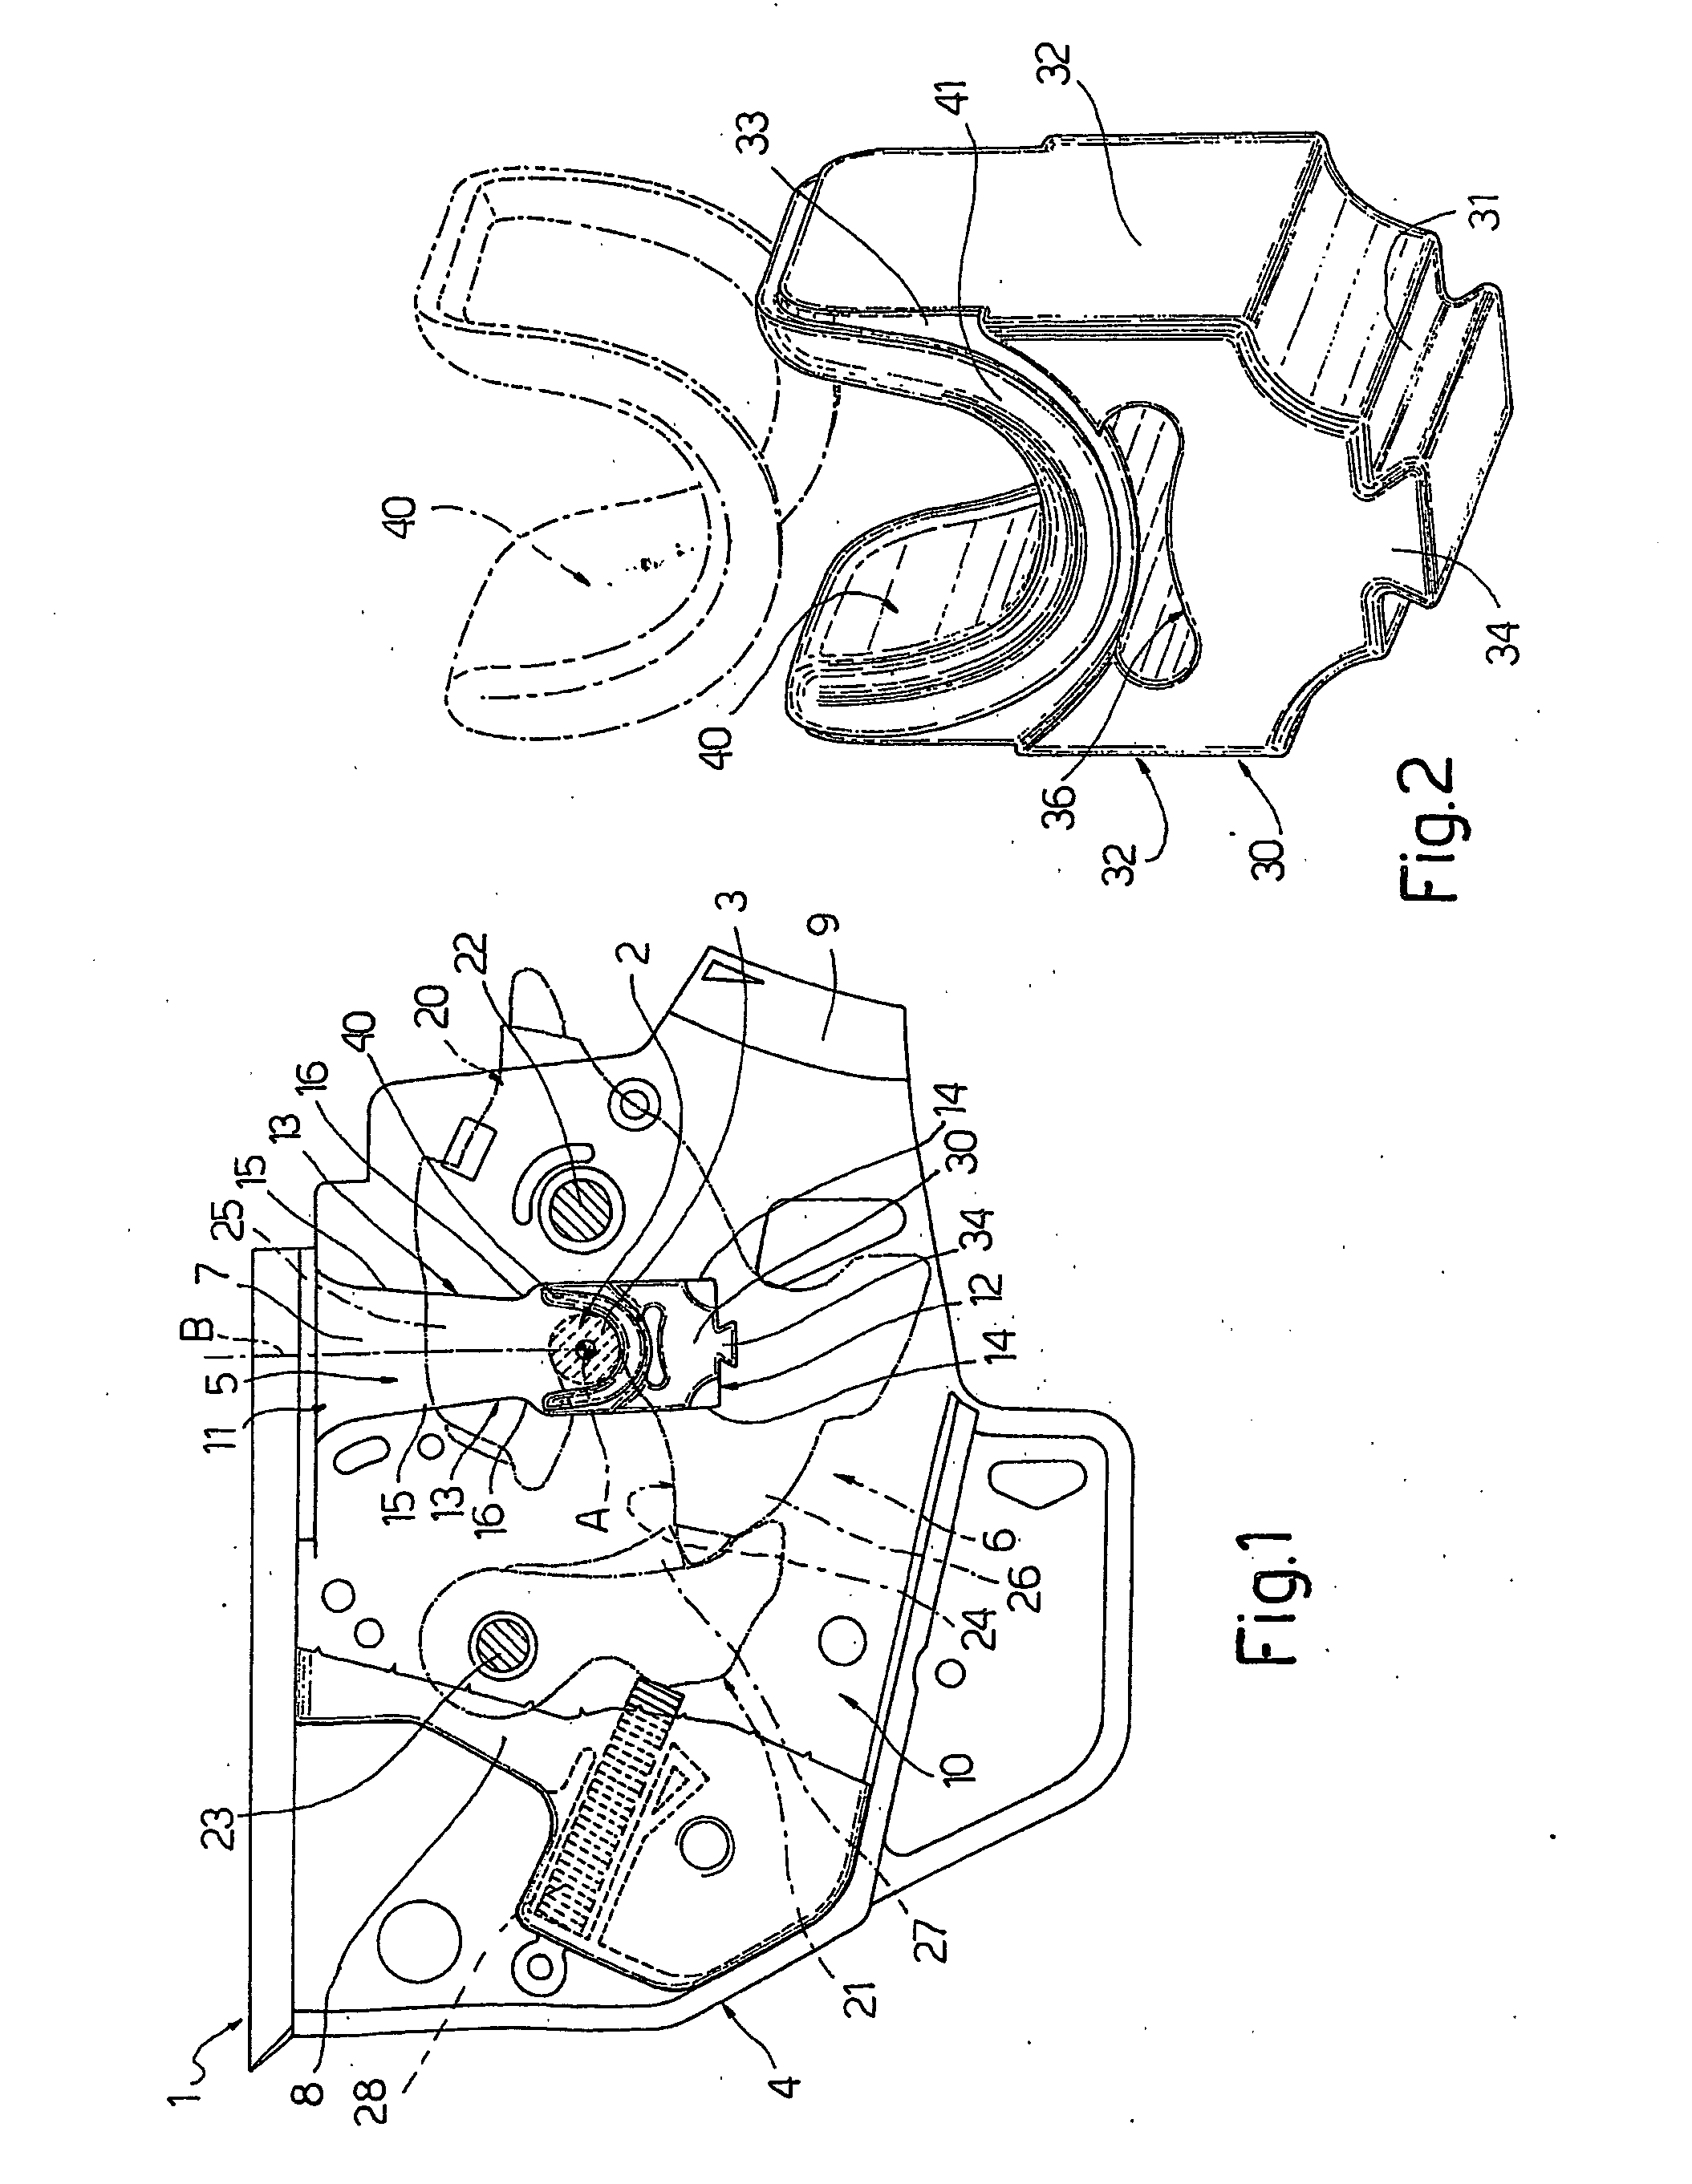 Lock for a door of a motor vehicle